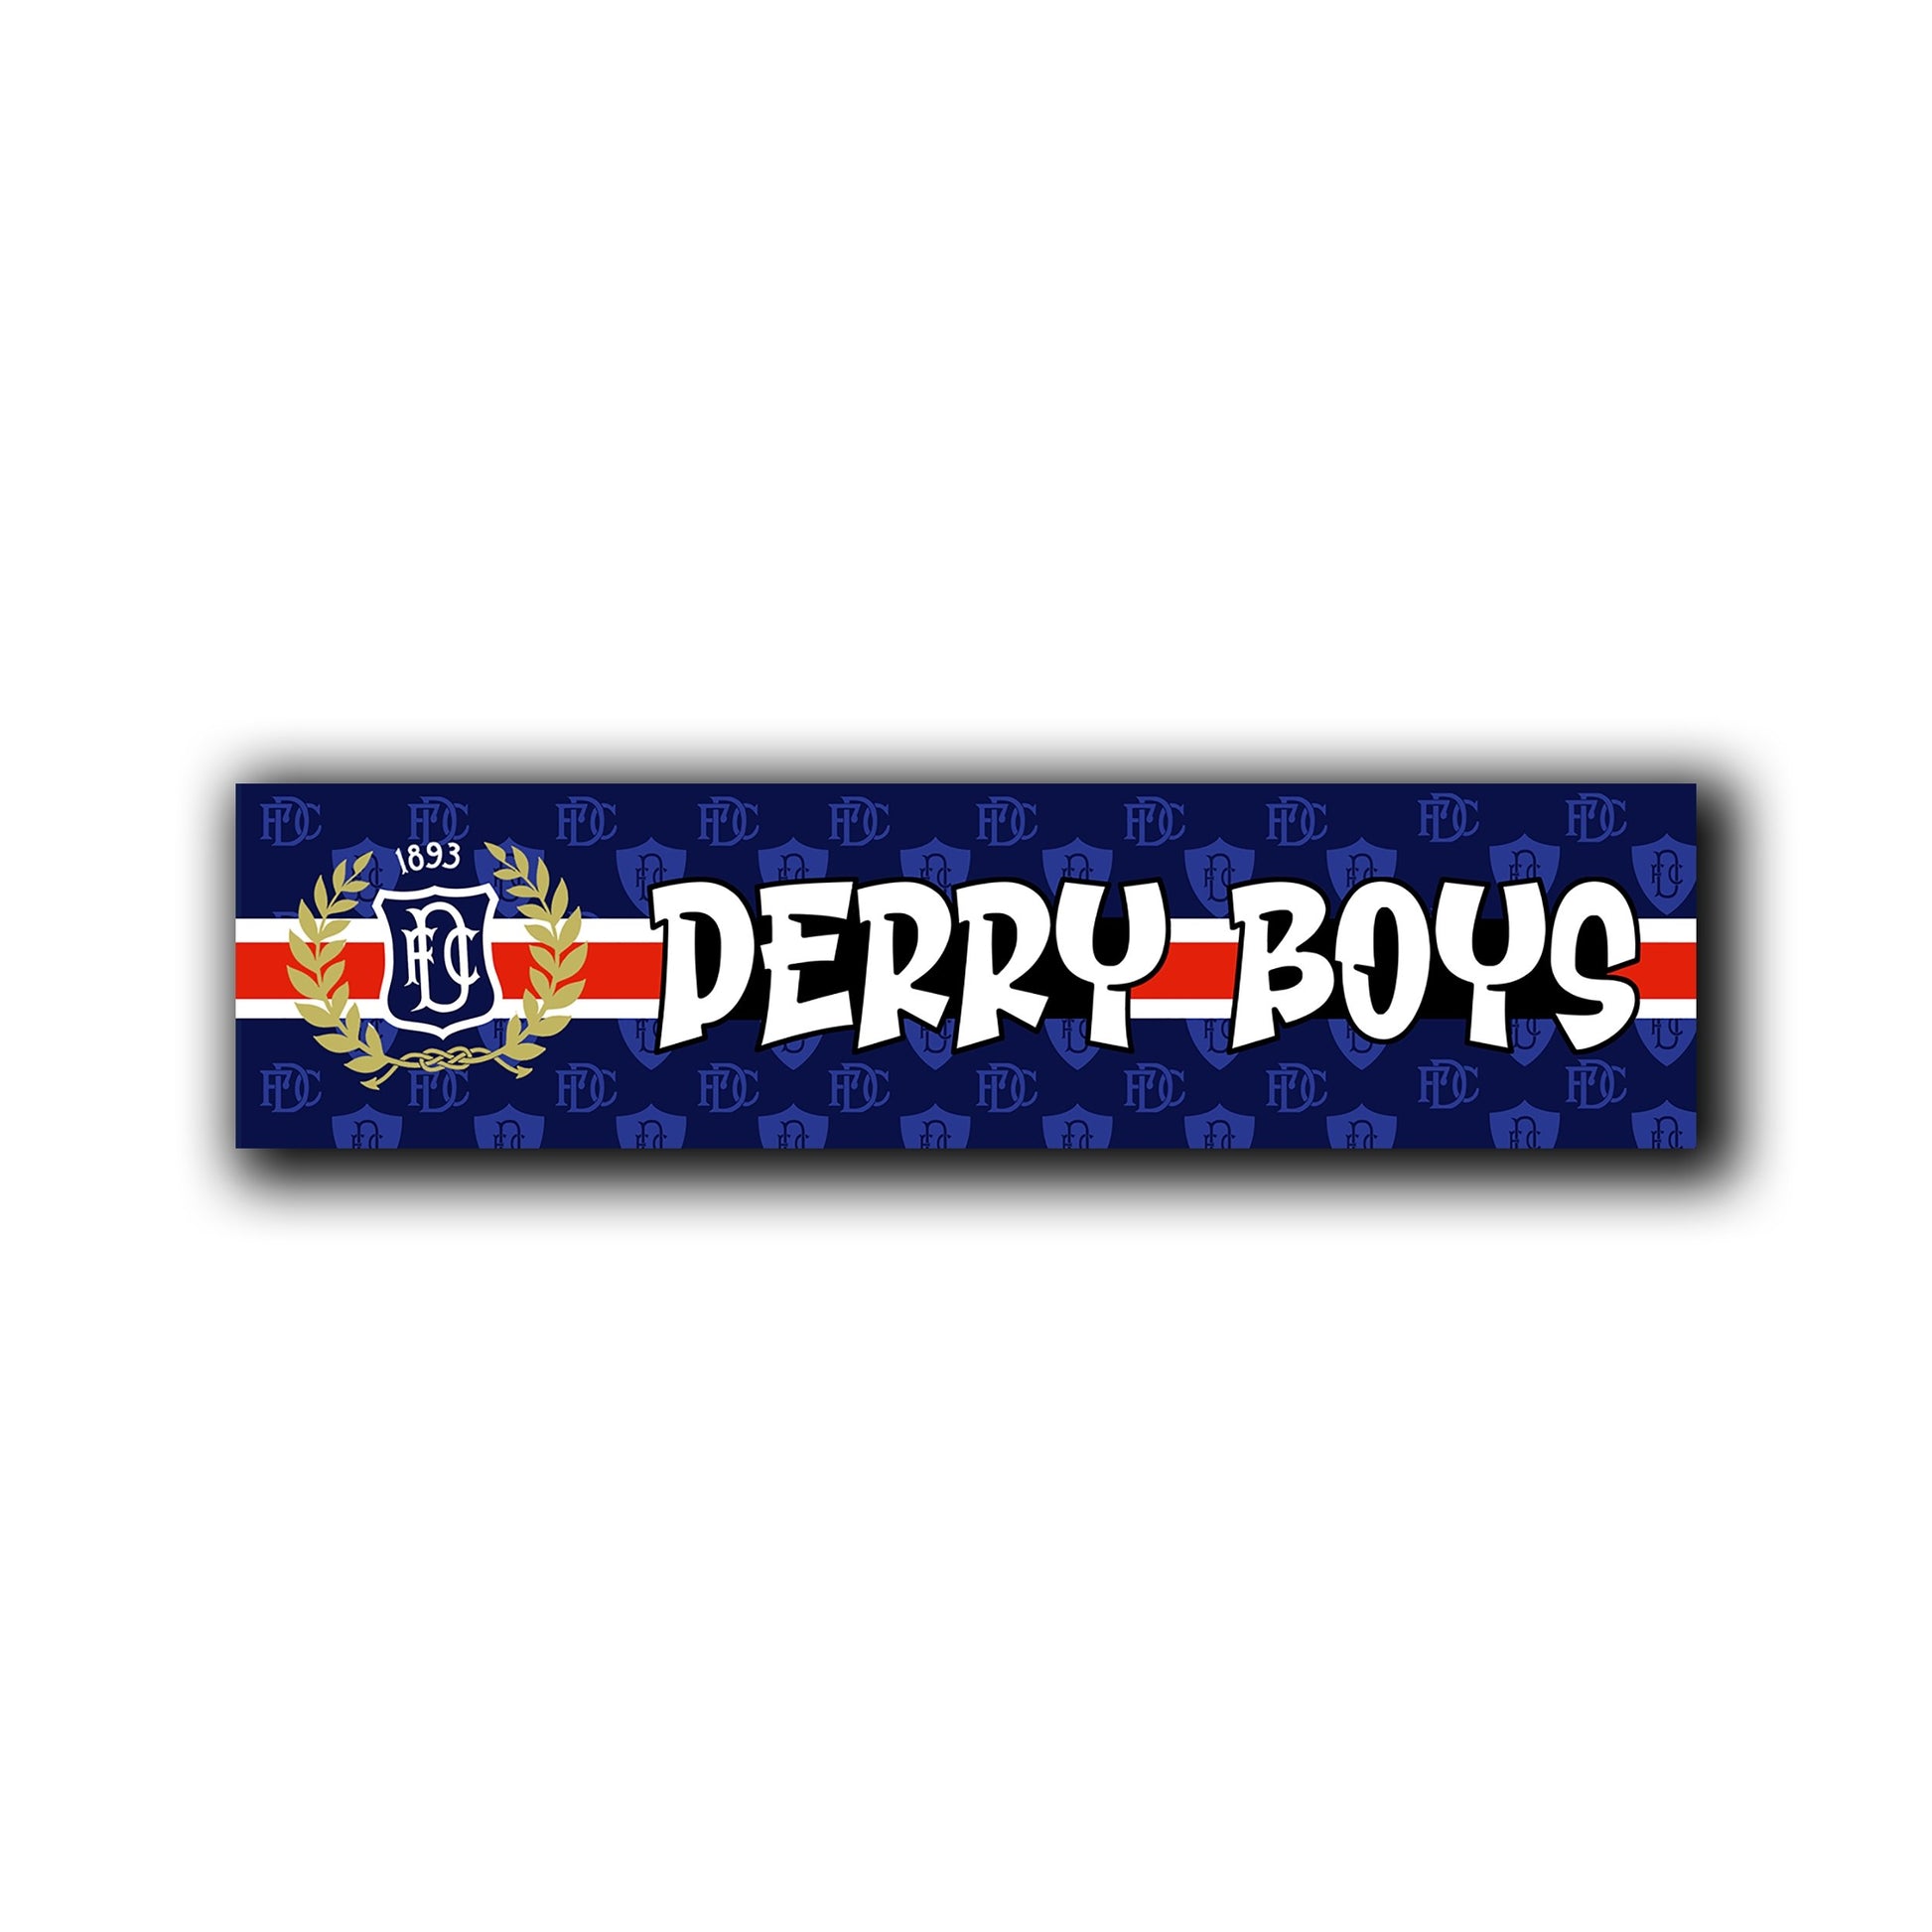 Dundee "Derry Boys" Stickers - North Section